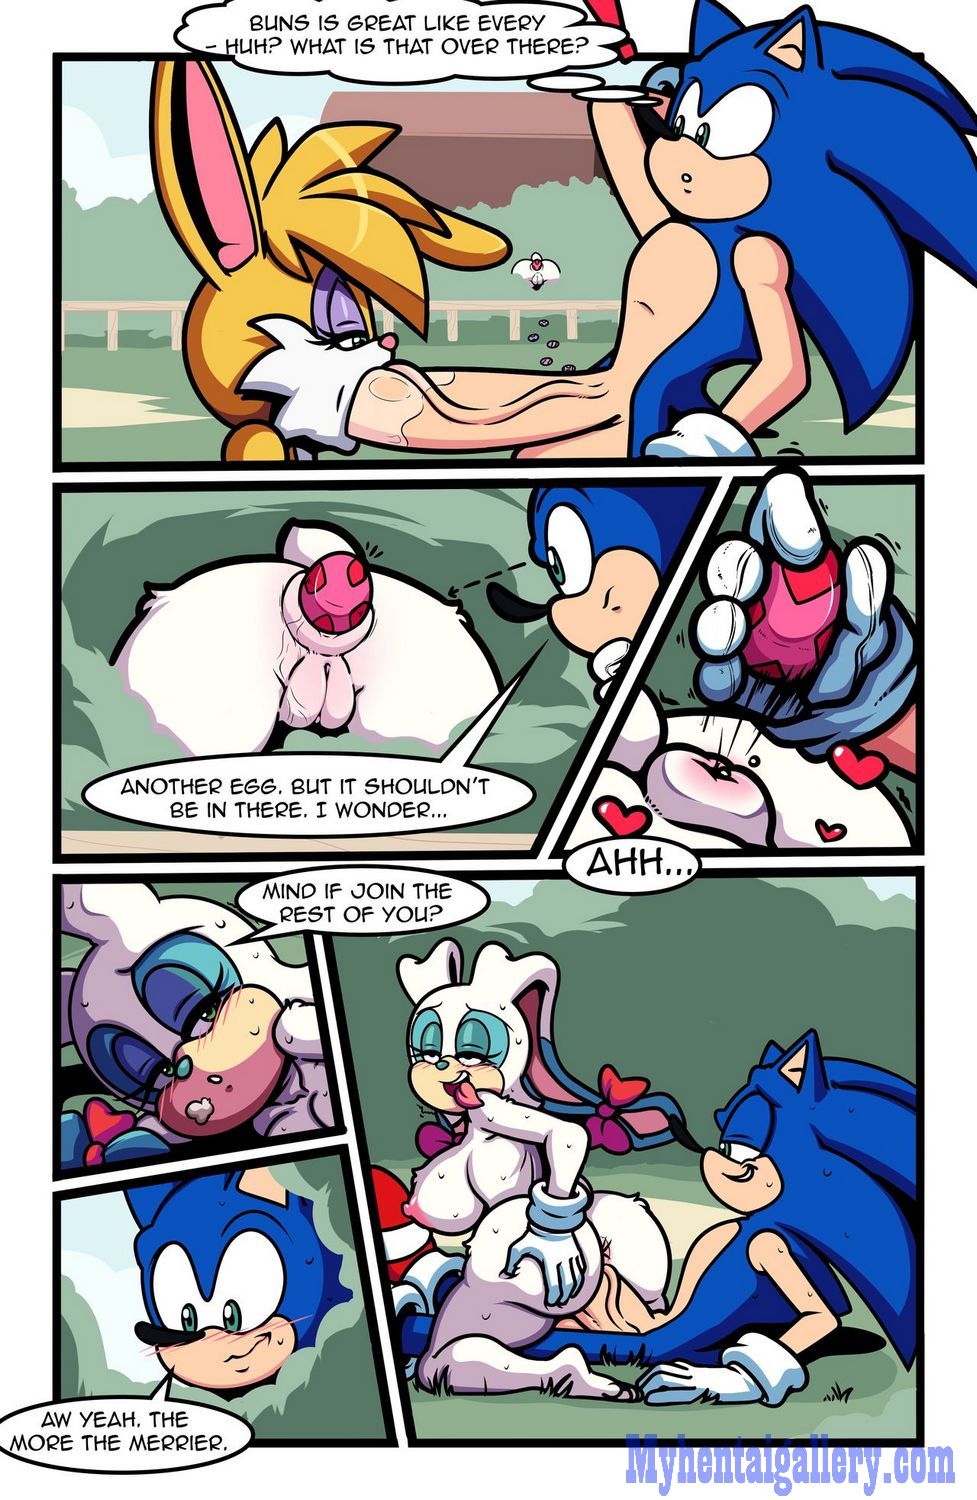 Cover Sonic’s Easter Treat